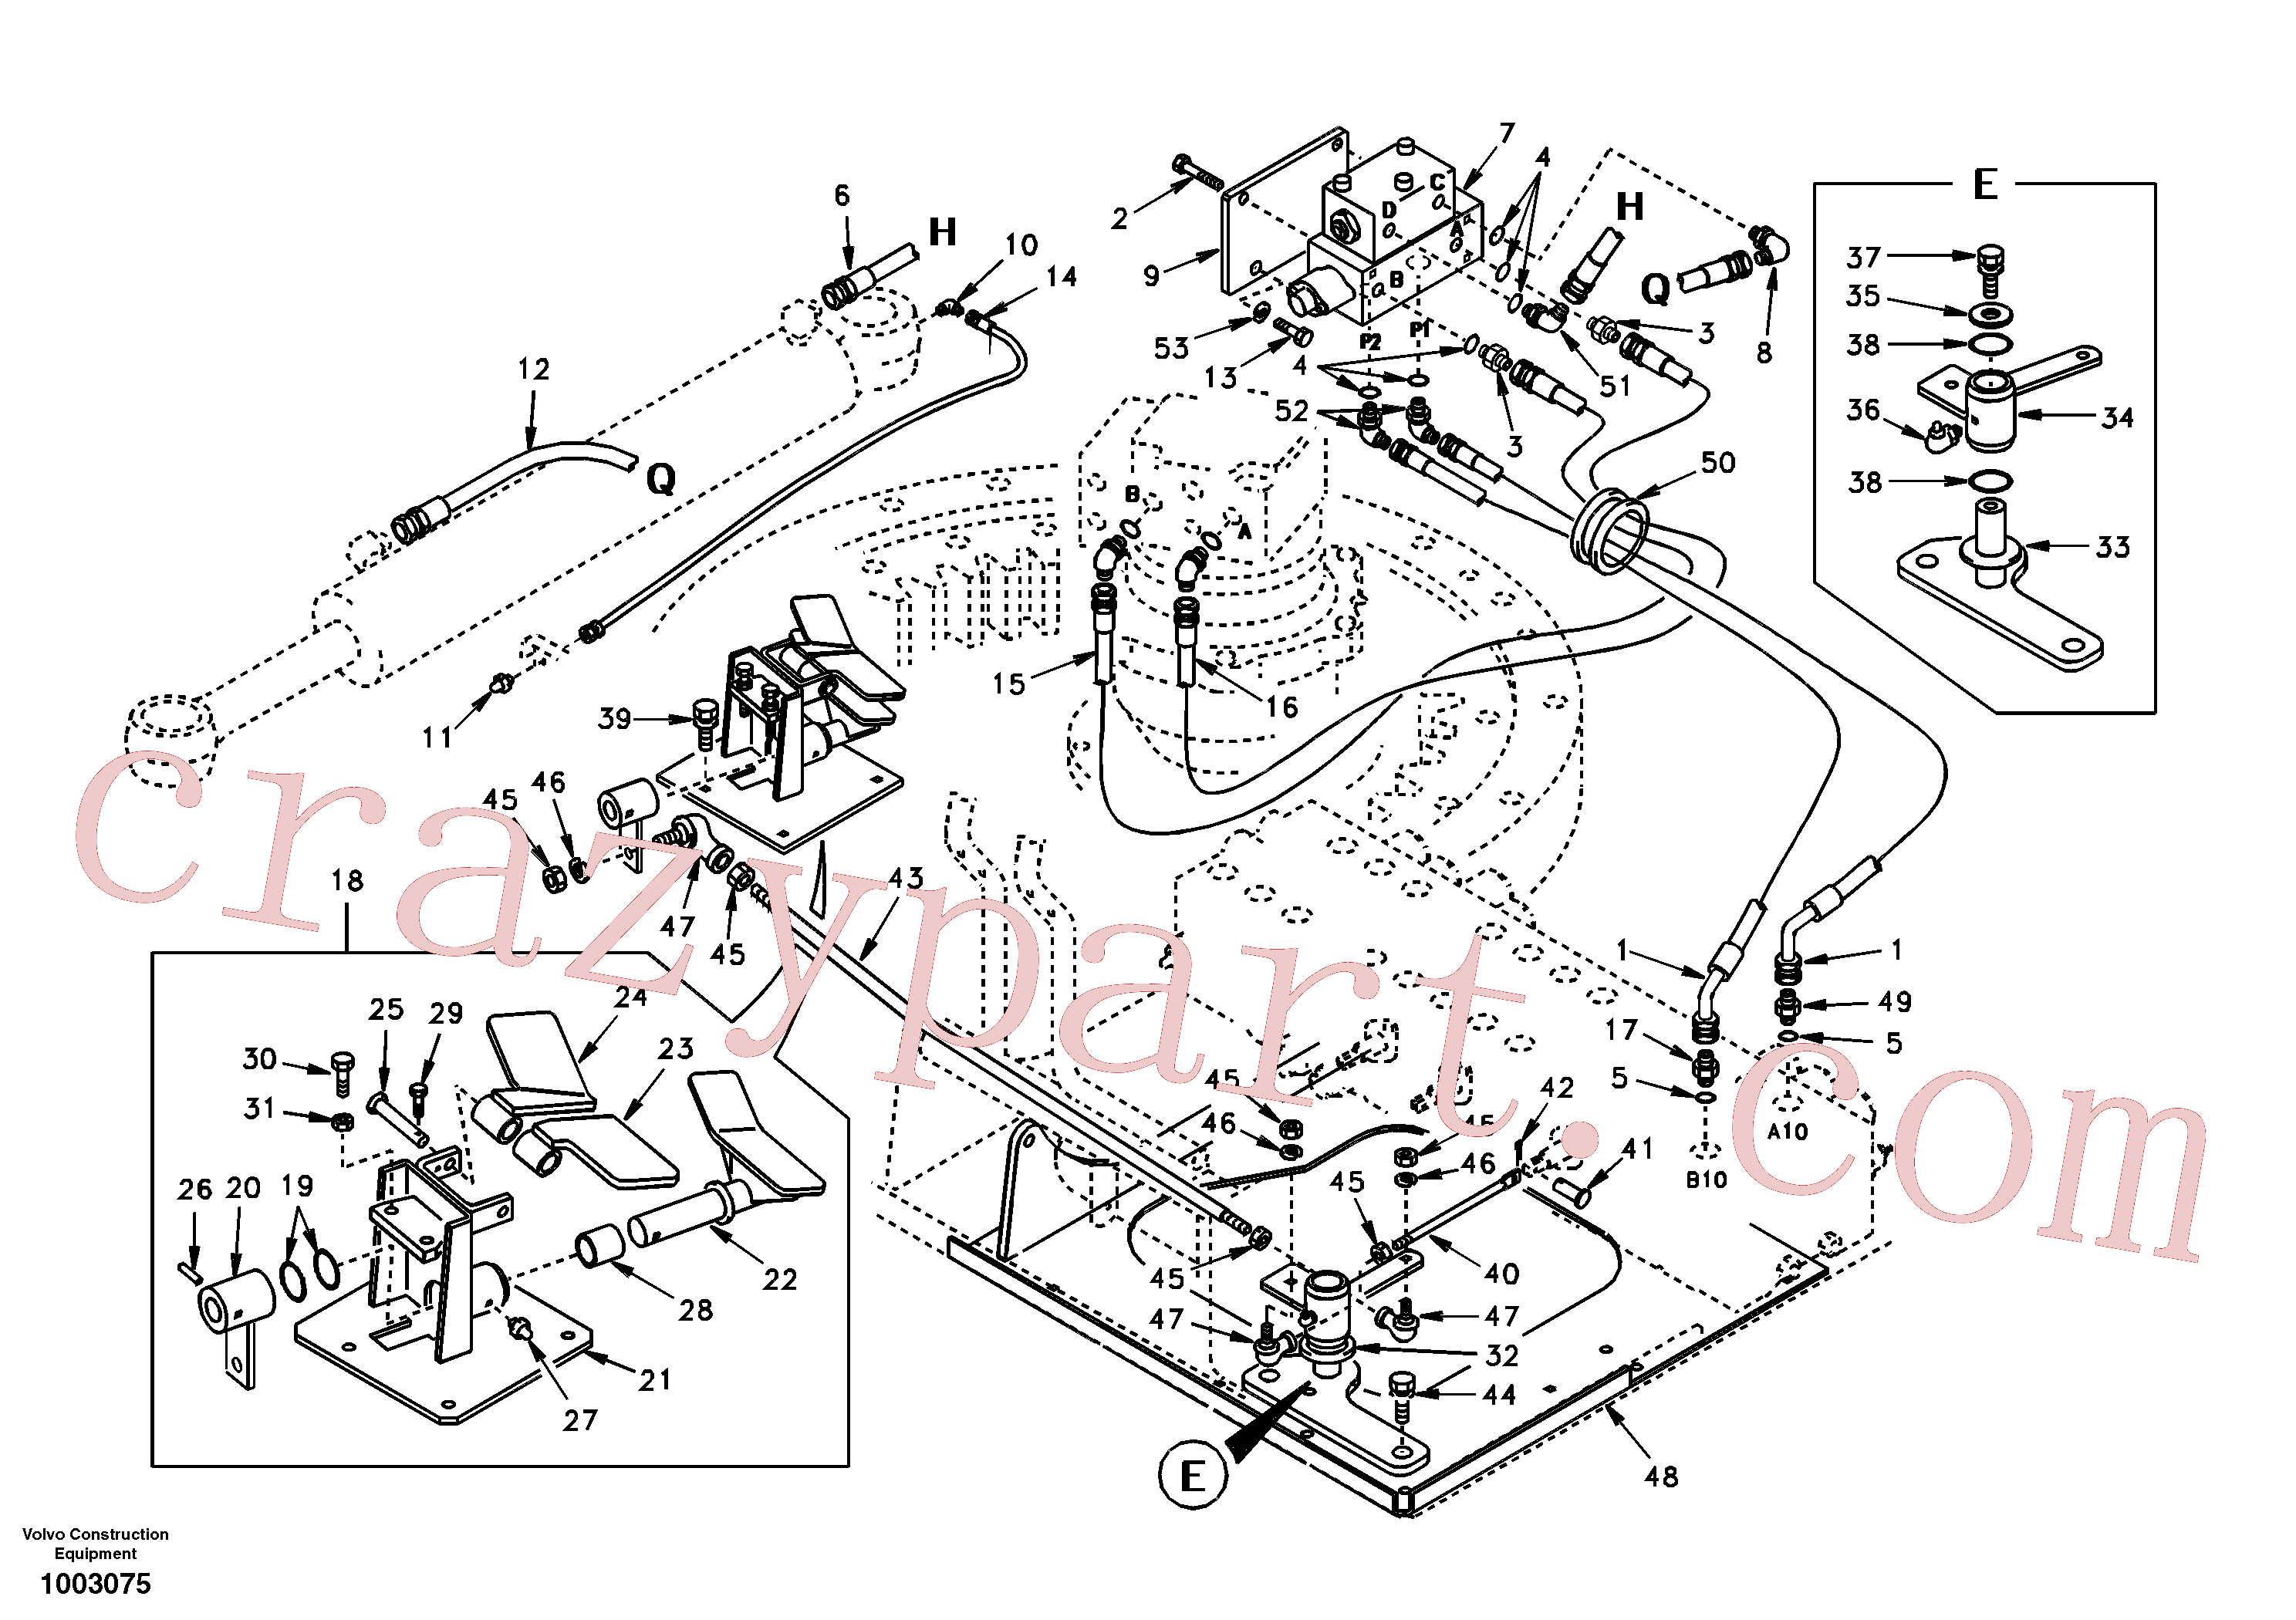 SA9453-03723 for Volvo Boom swing system(1003075 assembly)